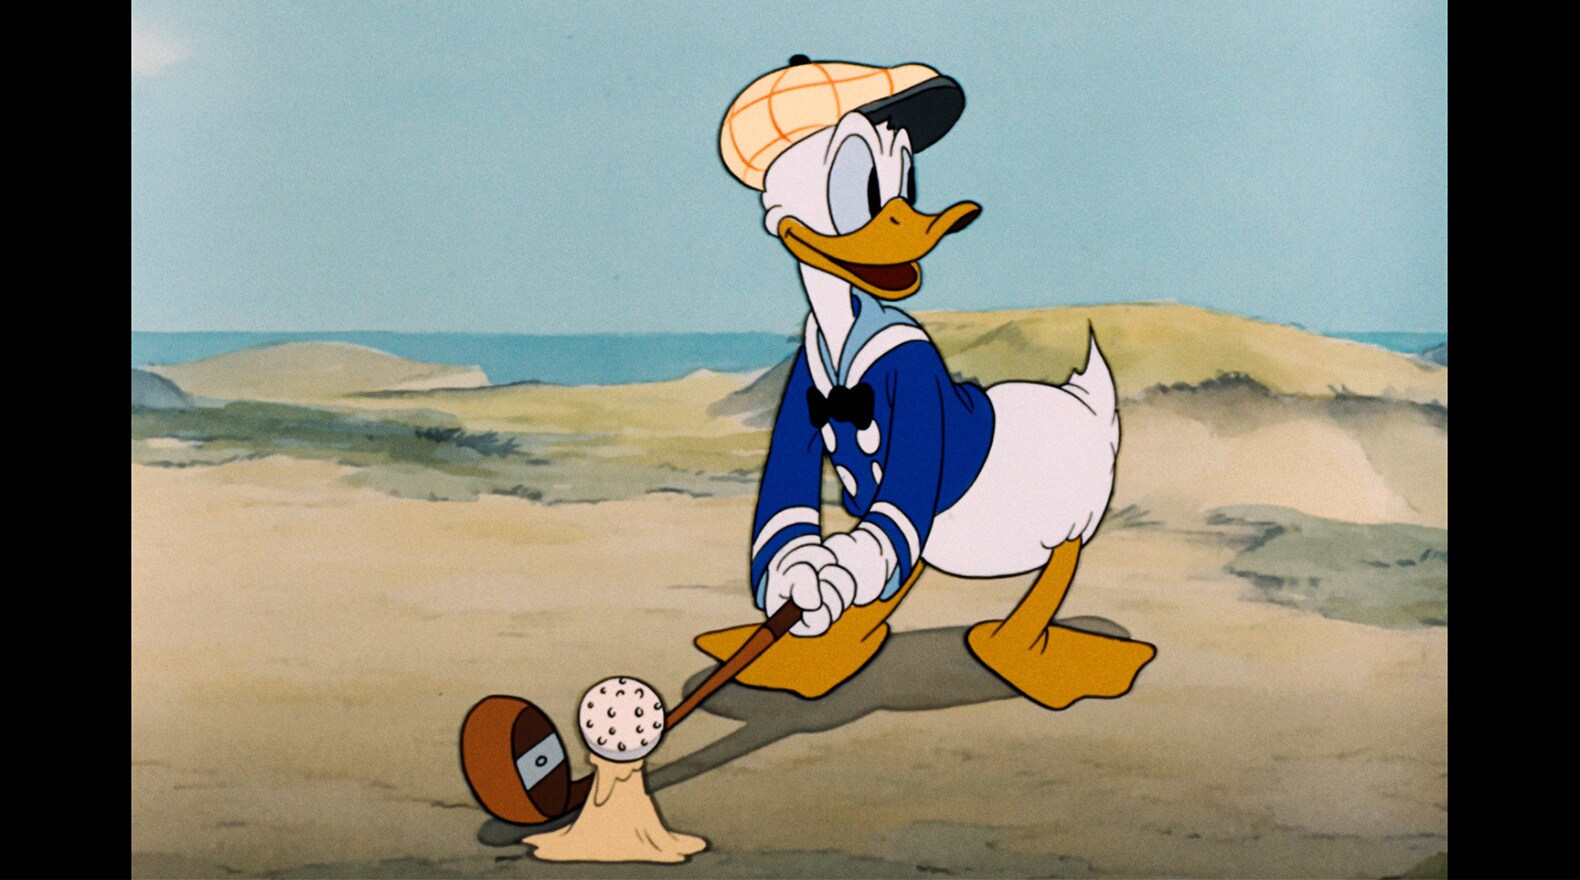 Donald has a little trouble on the fairway.